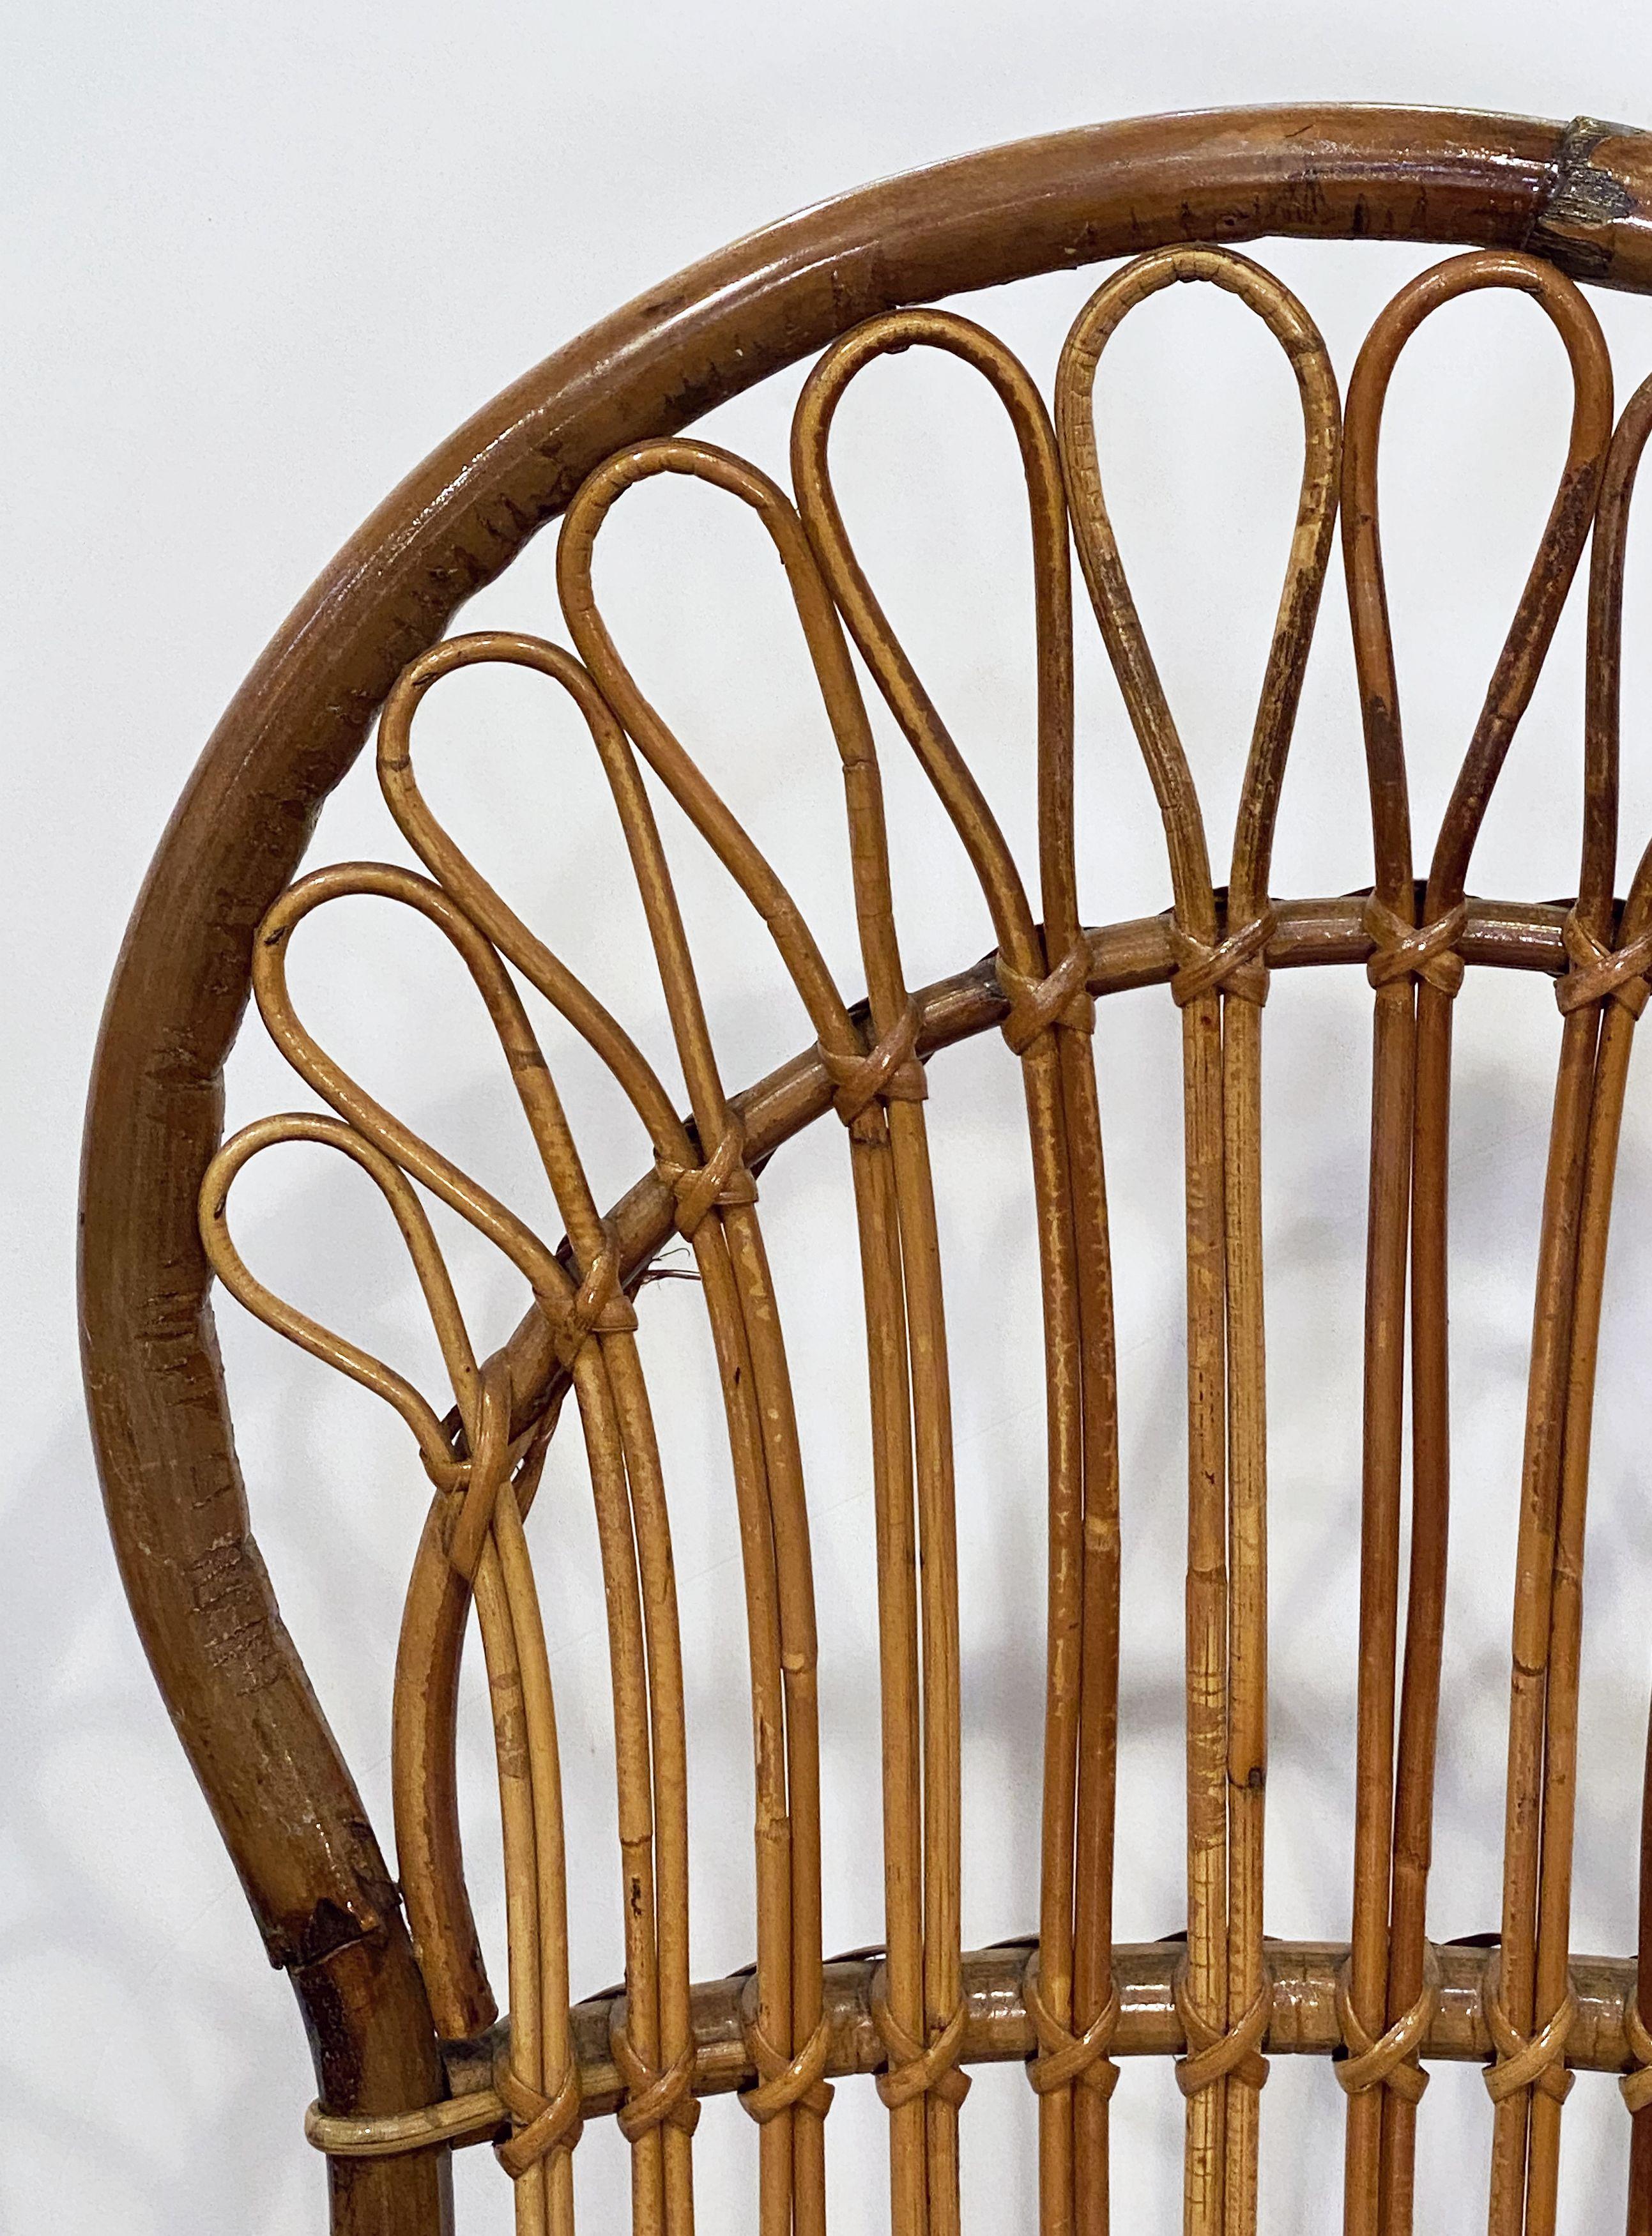 Italian Fan-Backed Chair of Rattan and Bamboo from the Mid-20th Century For Sale 12